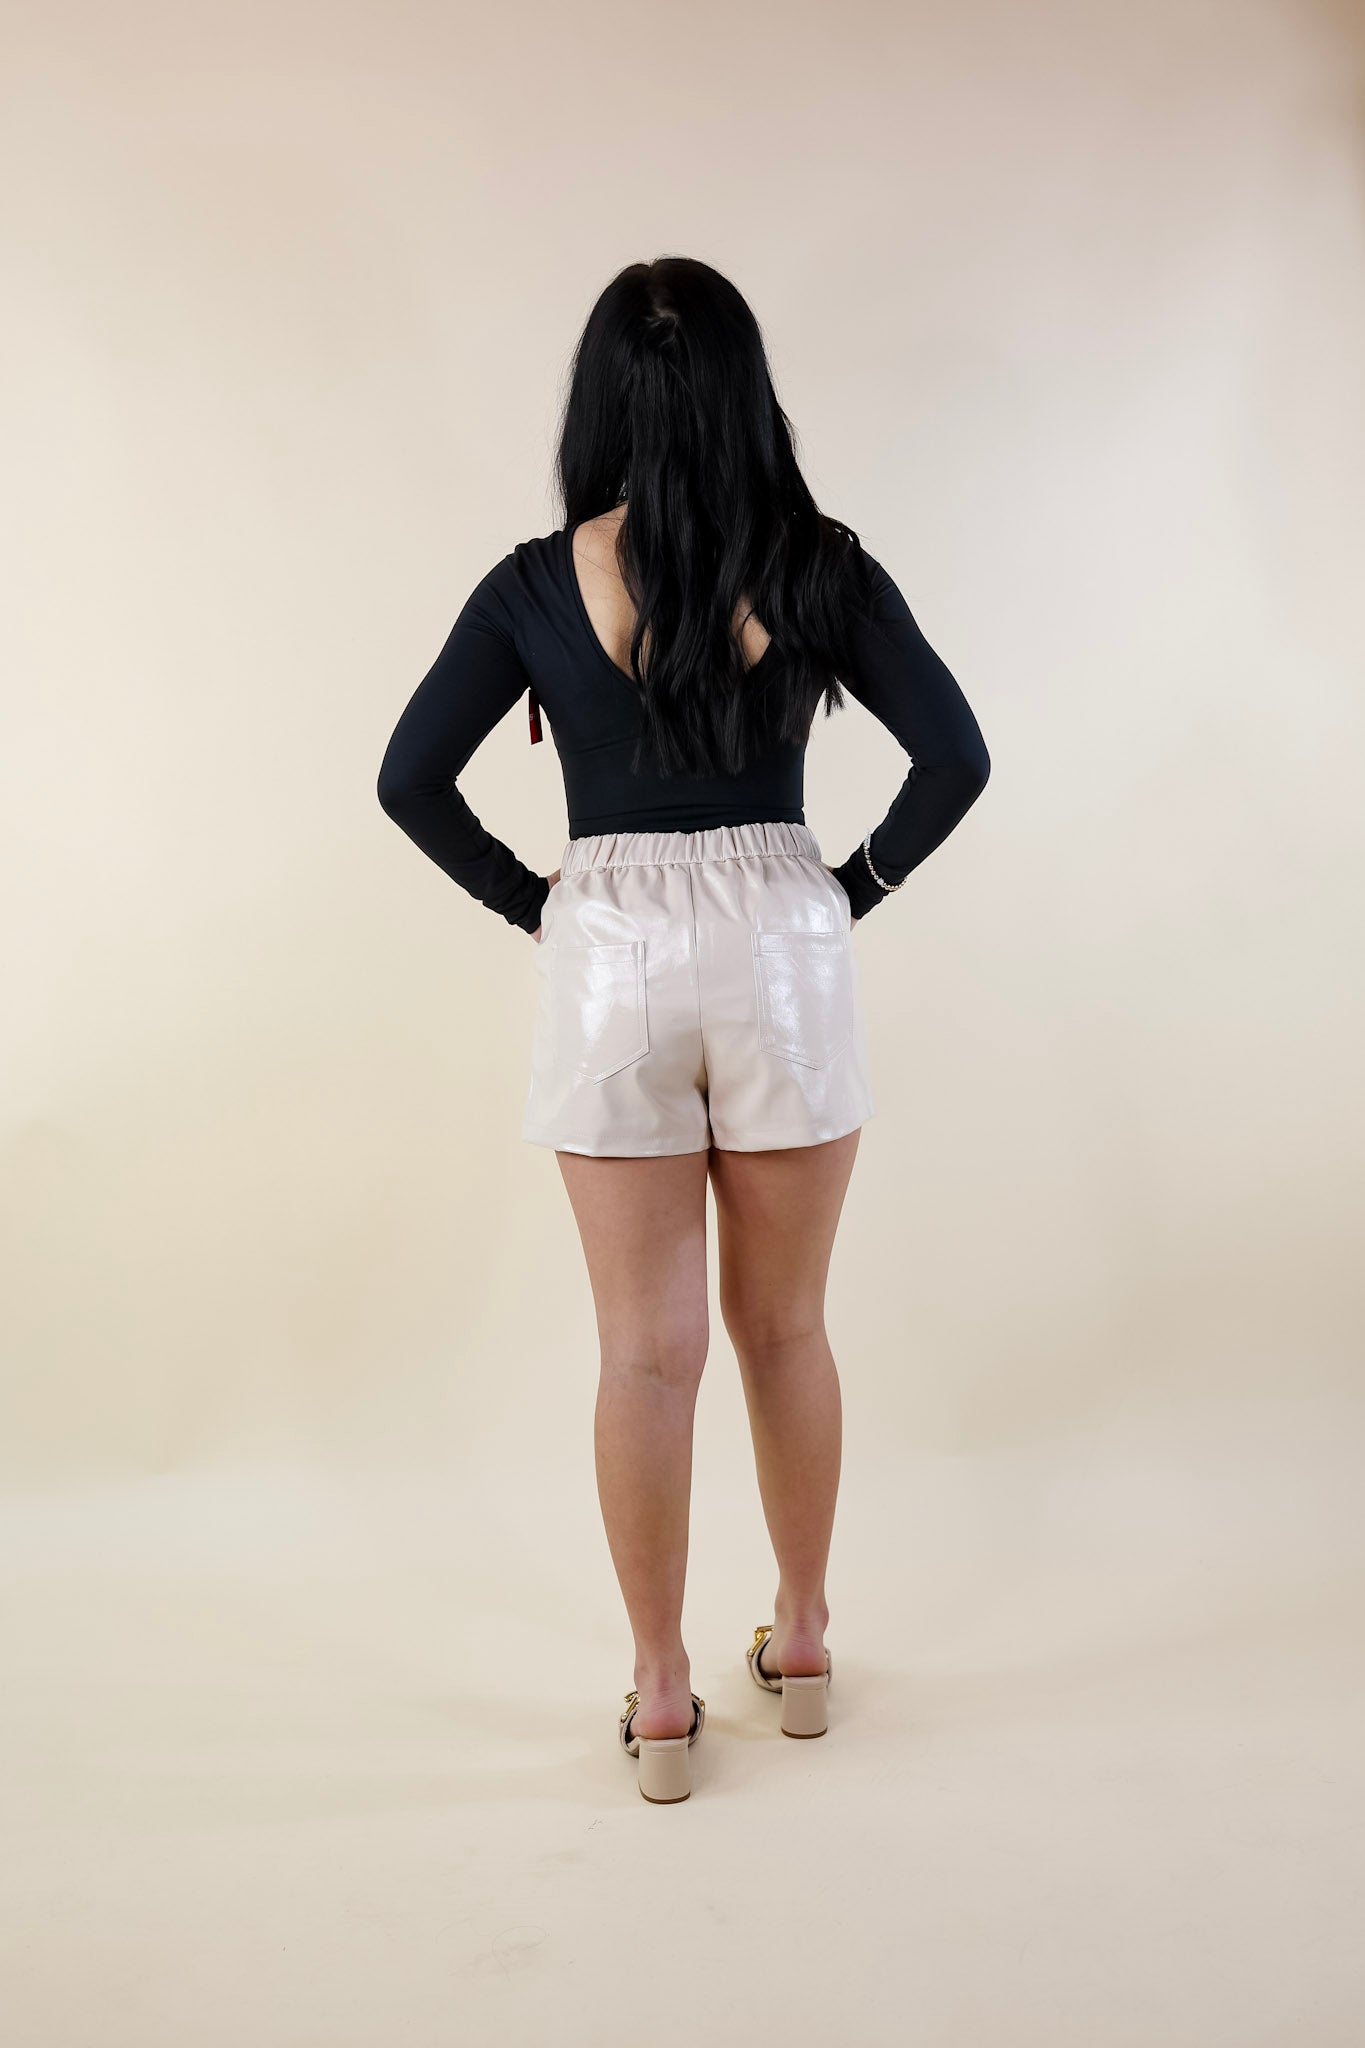 BuddyLove | Vince Vegan Leather Shorts in Cream - Giddy Up Glamour Boutique